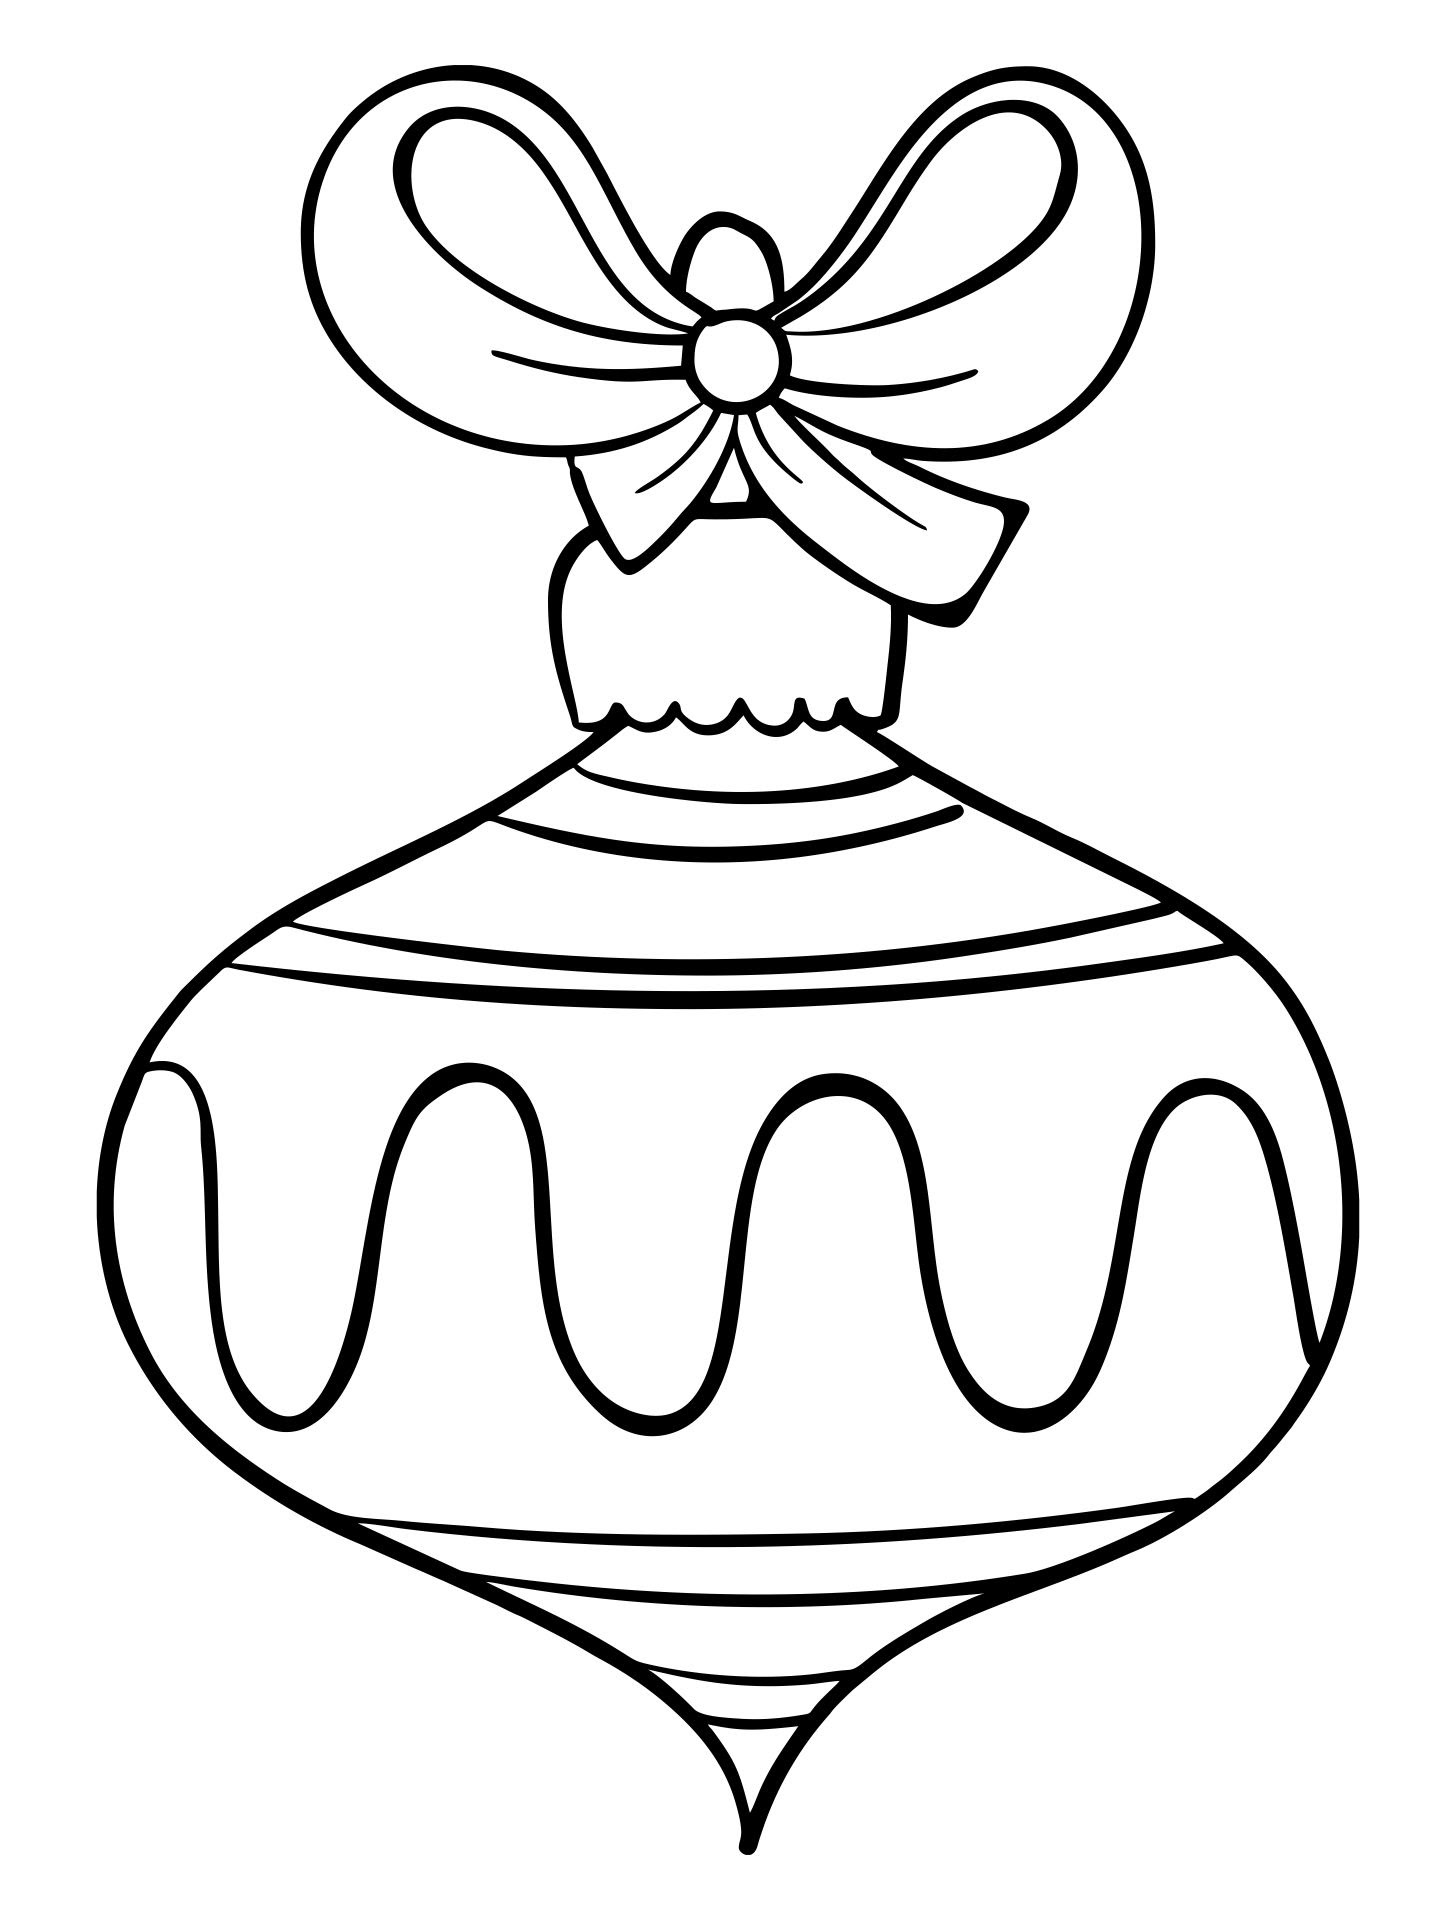 Round Christmas Ornament coloring page Free Printable Coloring Pages ...